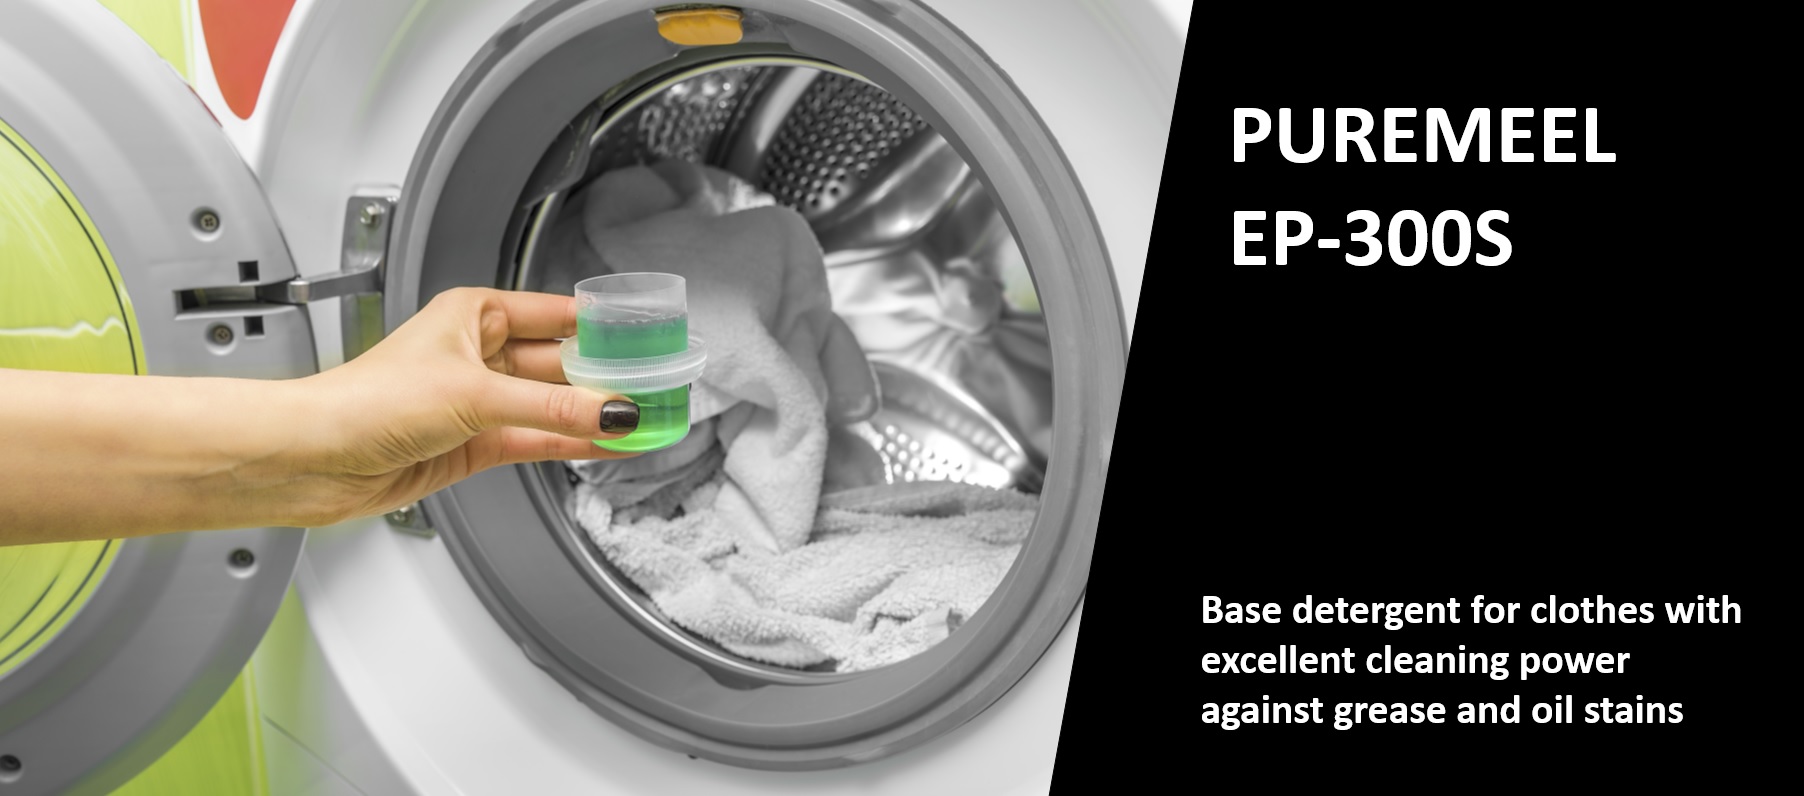 Polyoxyalkylene alkylamine-based detergent base for clothes "PUREMEEL EP-300S" is now open.